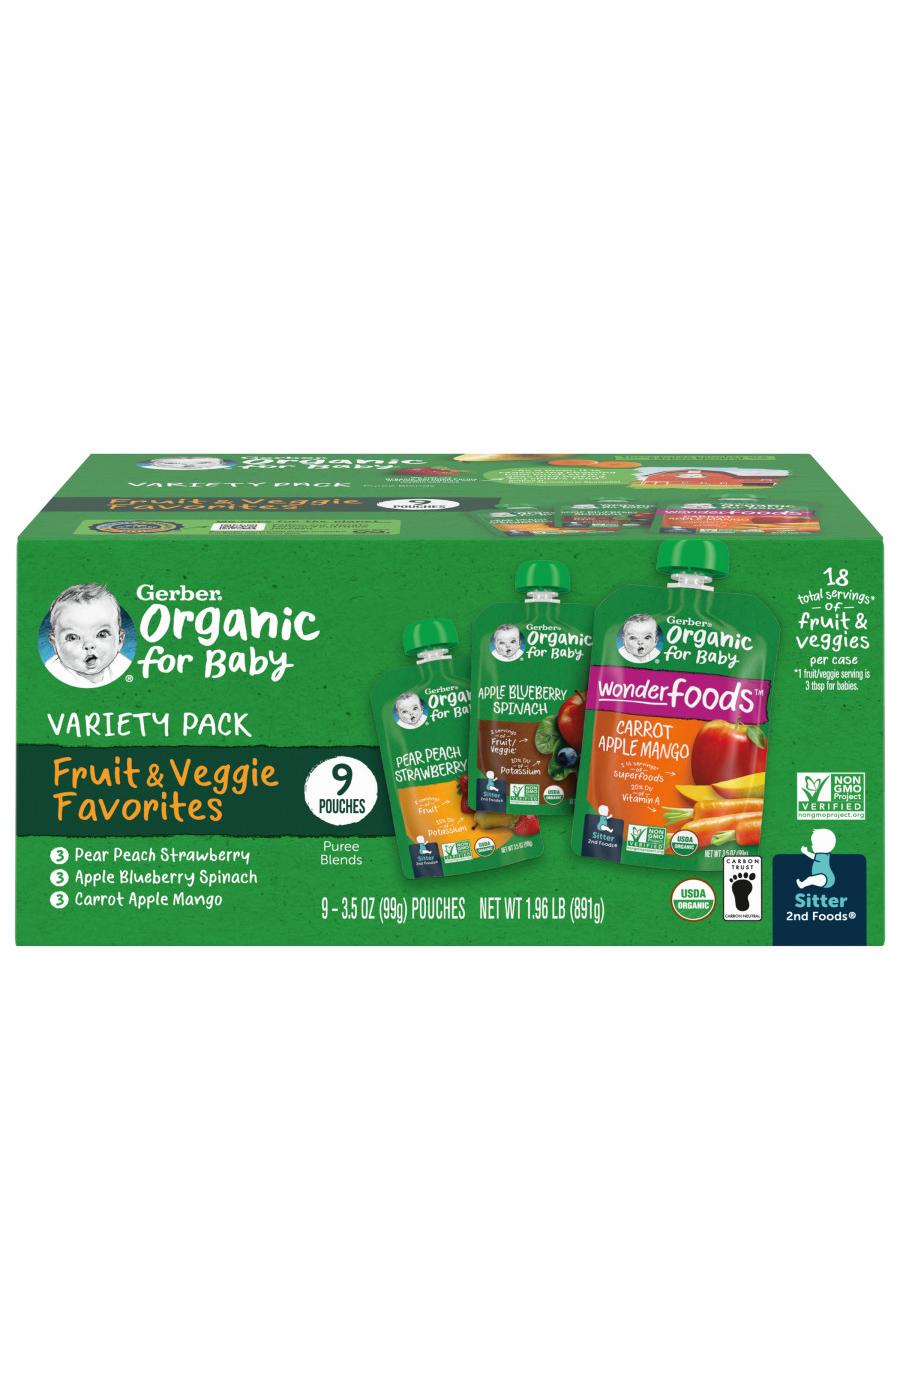 Gerber Organic for Baby Pouches Variety Pack - Fruit & Veggie Favorites; image 1 of 8